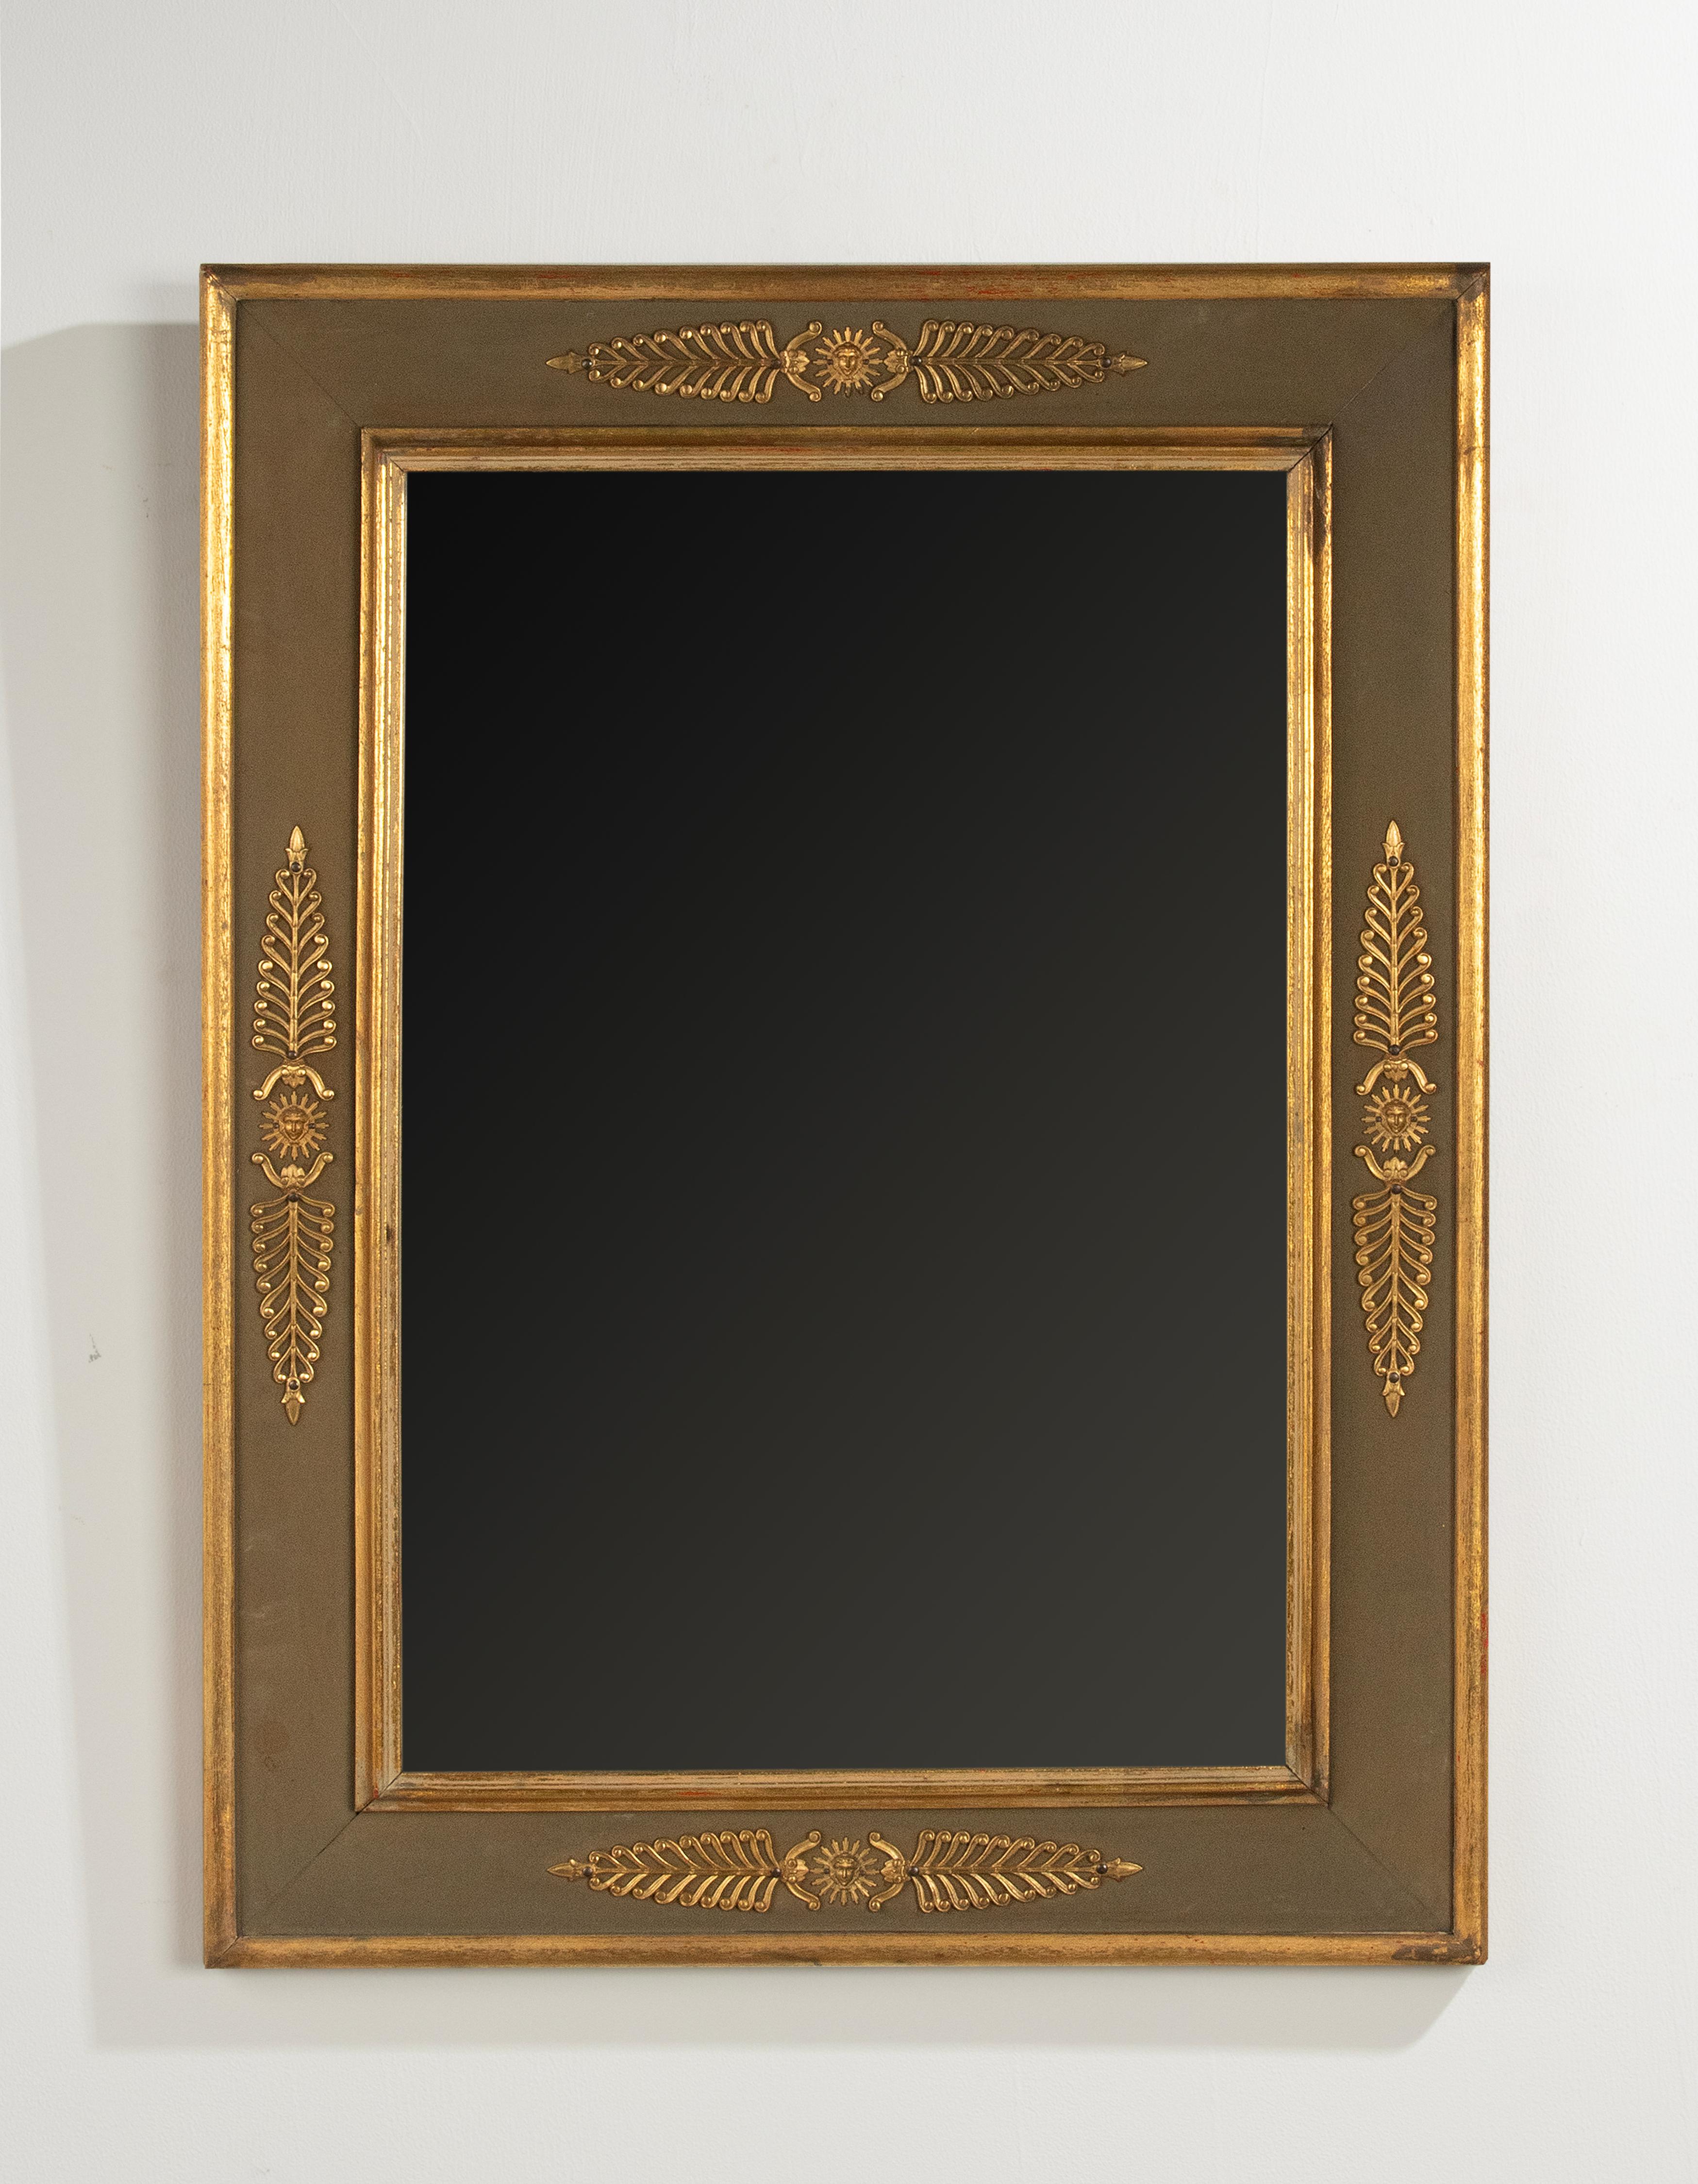 An elegant small mirror, made in the French Empire style. The base os made of pine.  The passe-partout is made of green colored canvas. Decorated on each side with ormolu bronze ornaments.
The mirror is in good condition. There are a few shallow